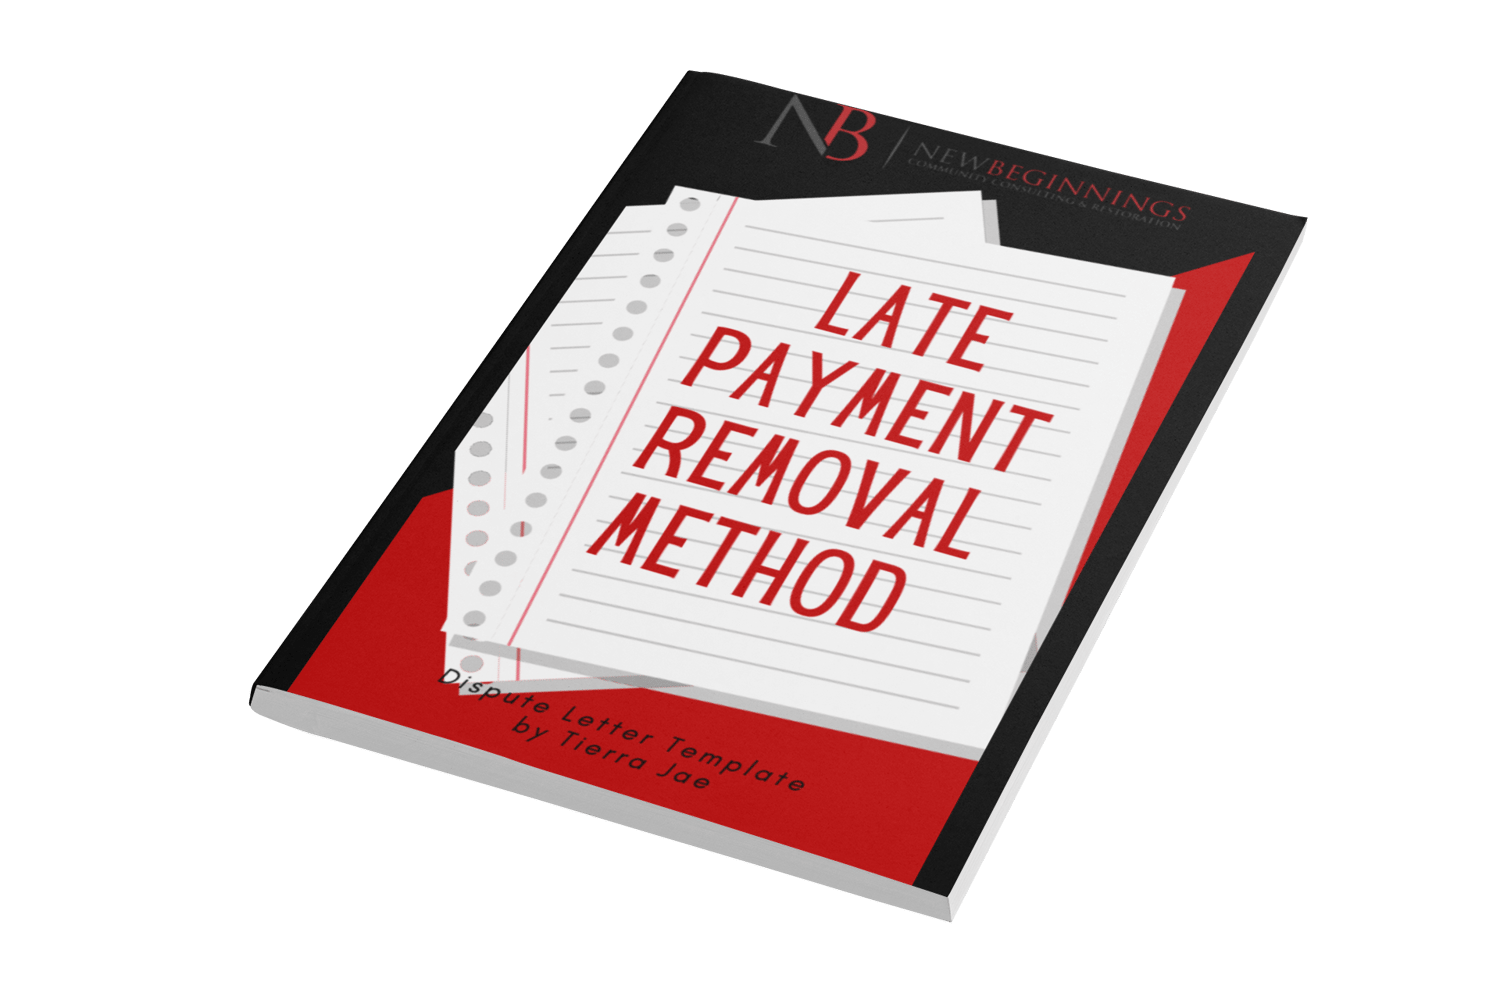 Image of Late Payment Removal Method